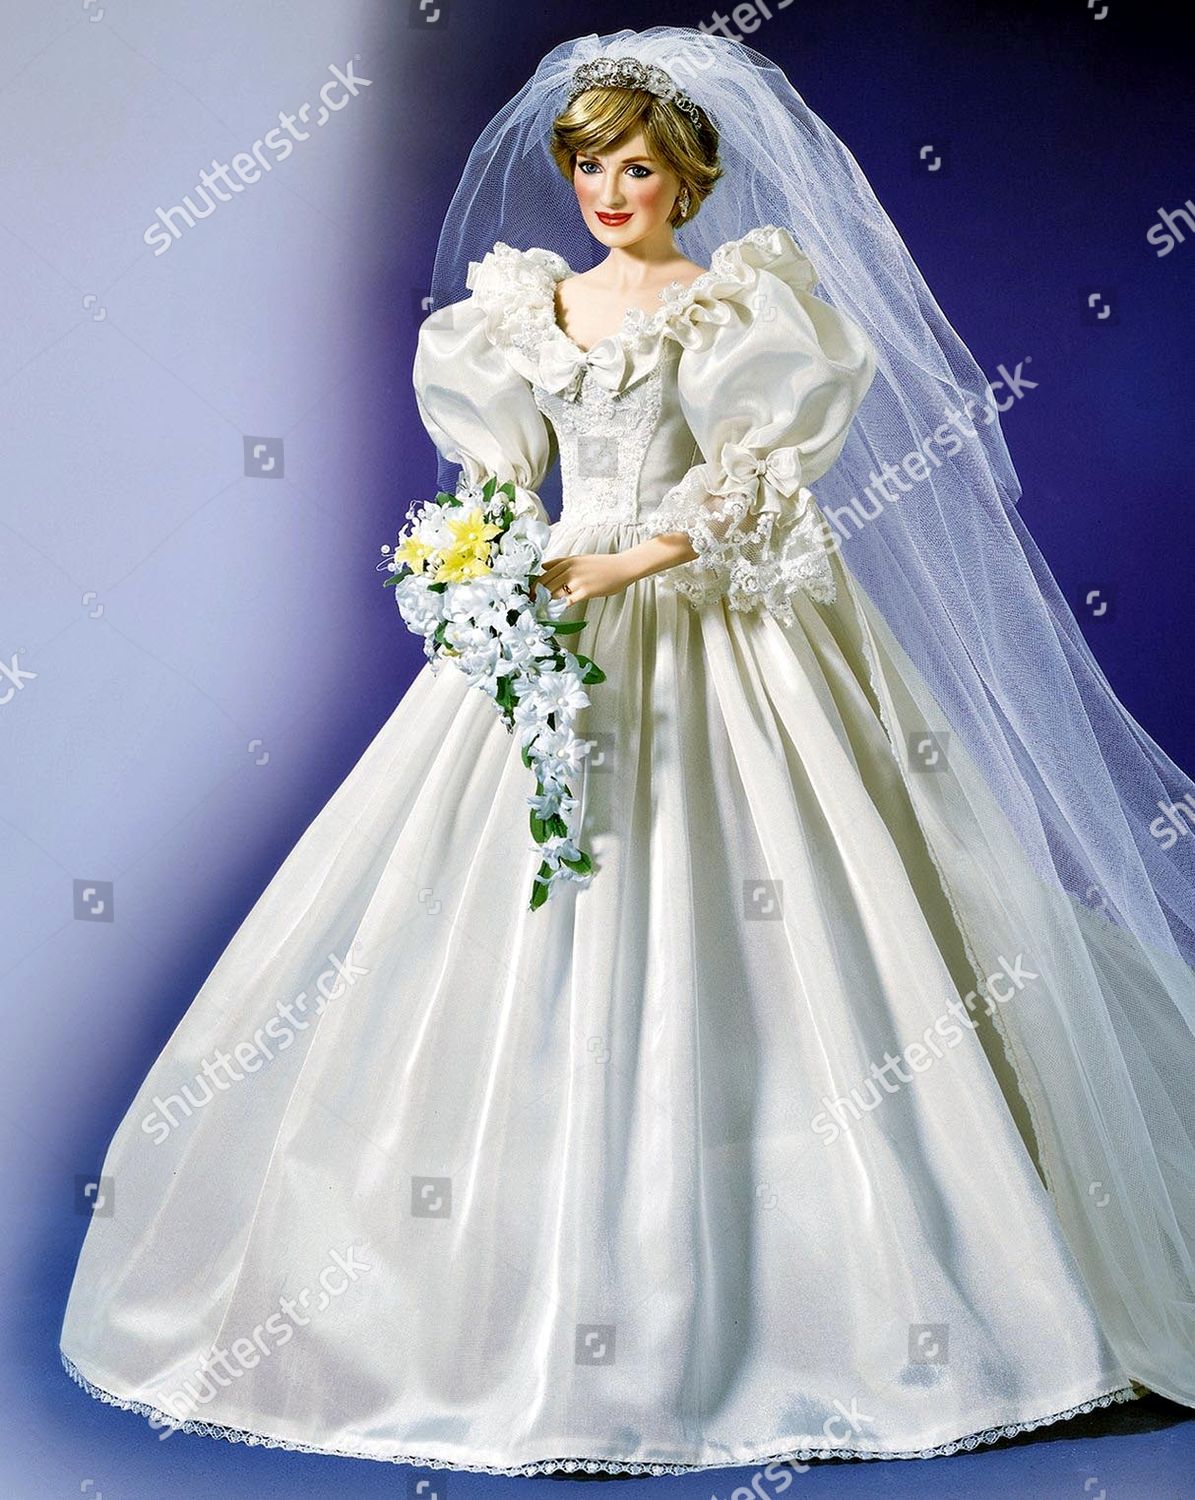 Princess diana doll small hoop for cartilage piercing